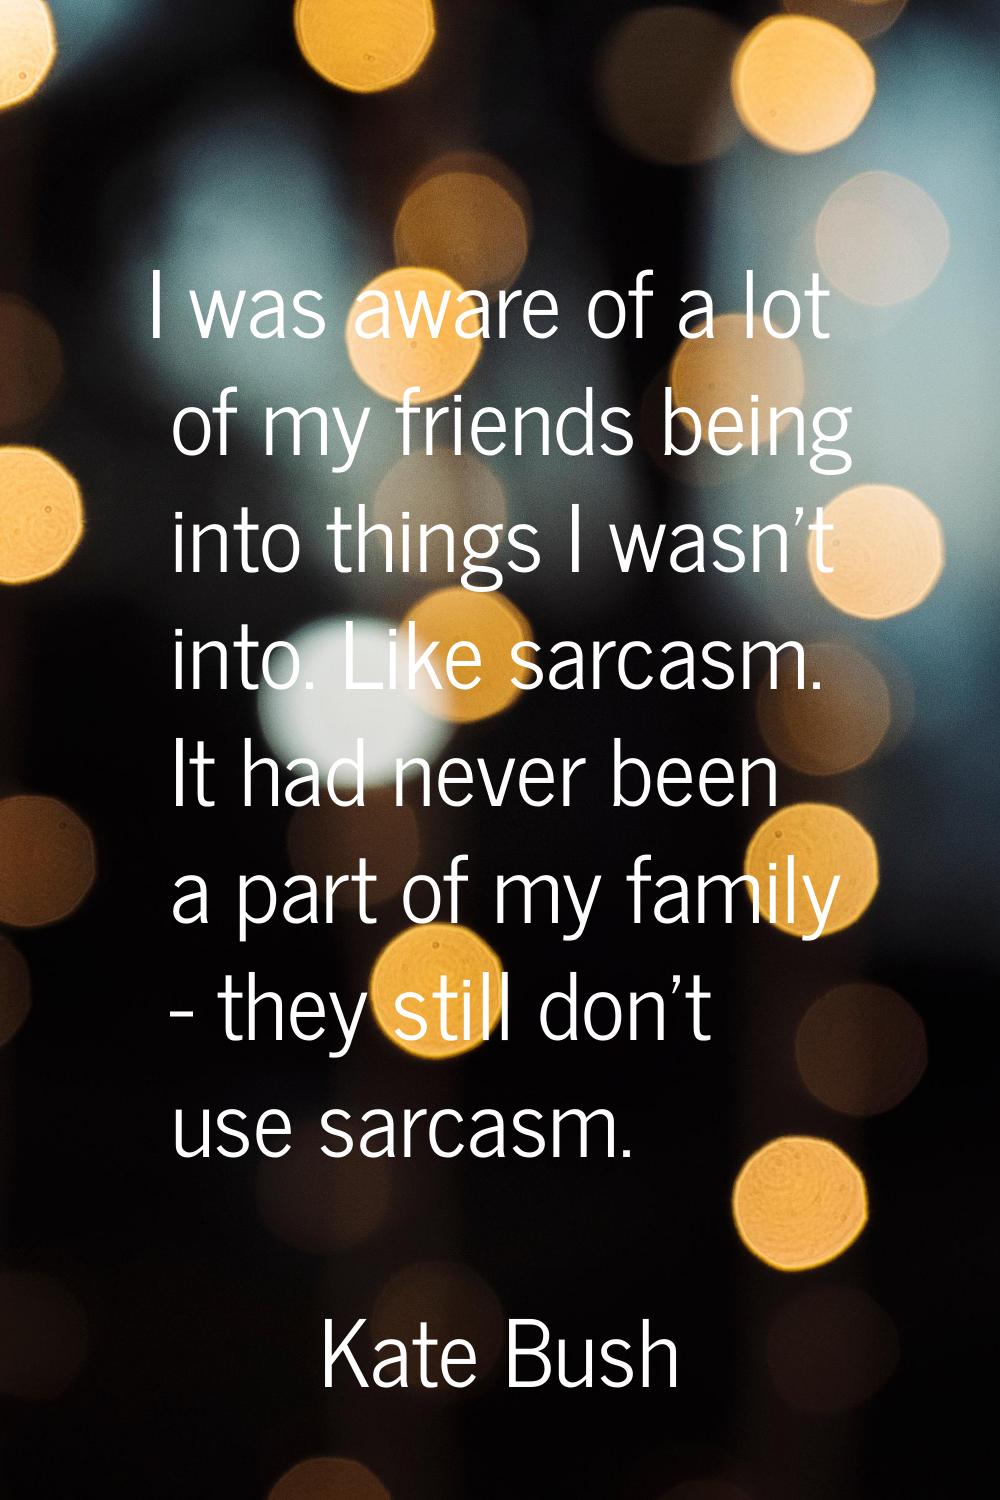 I was aware of a lot of my friends being into things I wasn't into. Like sarcasm. It had never been